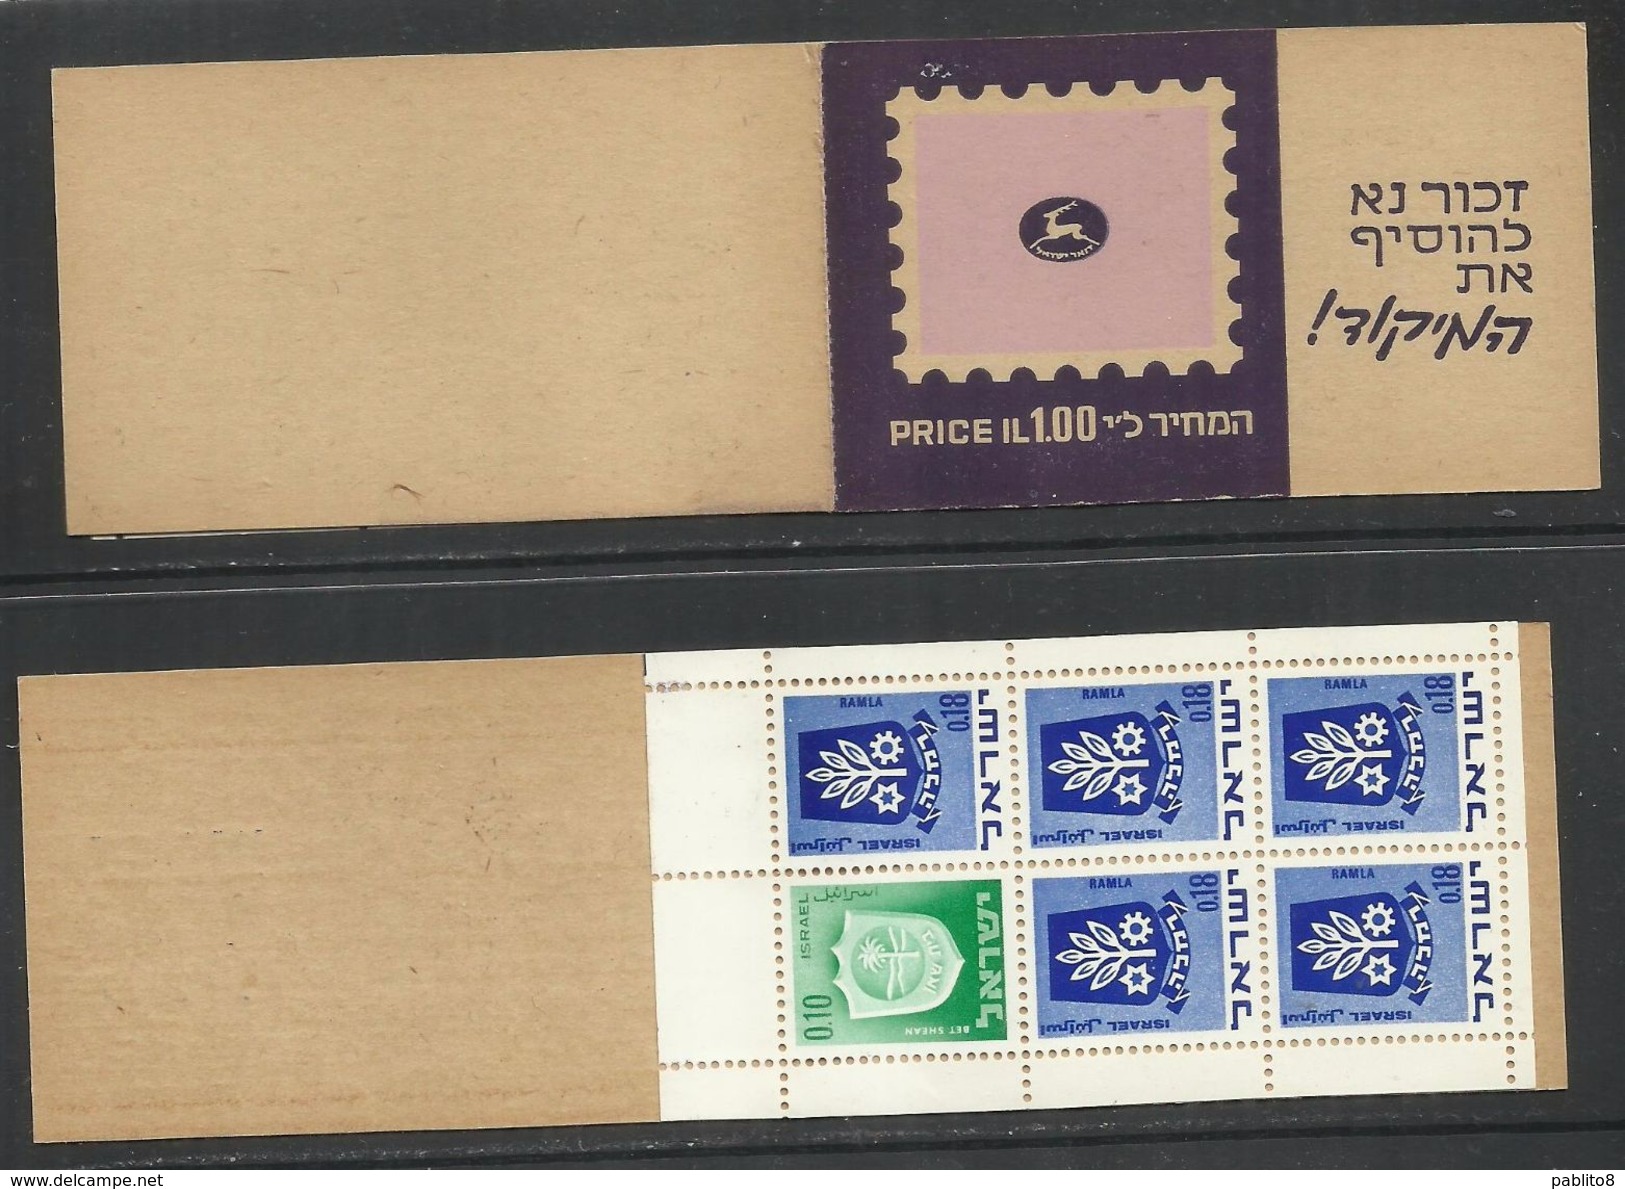 ISRAEL ISRAELE 1972 TOWN EMBLEM COAT OF ARMS STEMMI DI CITTA' BOOKLET LIBRETTO NUOVO UNUSED MNH - Booklets